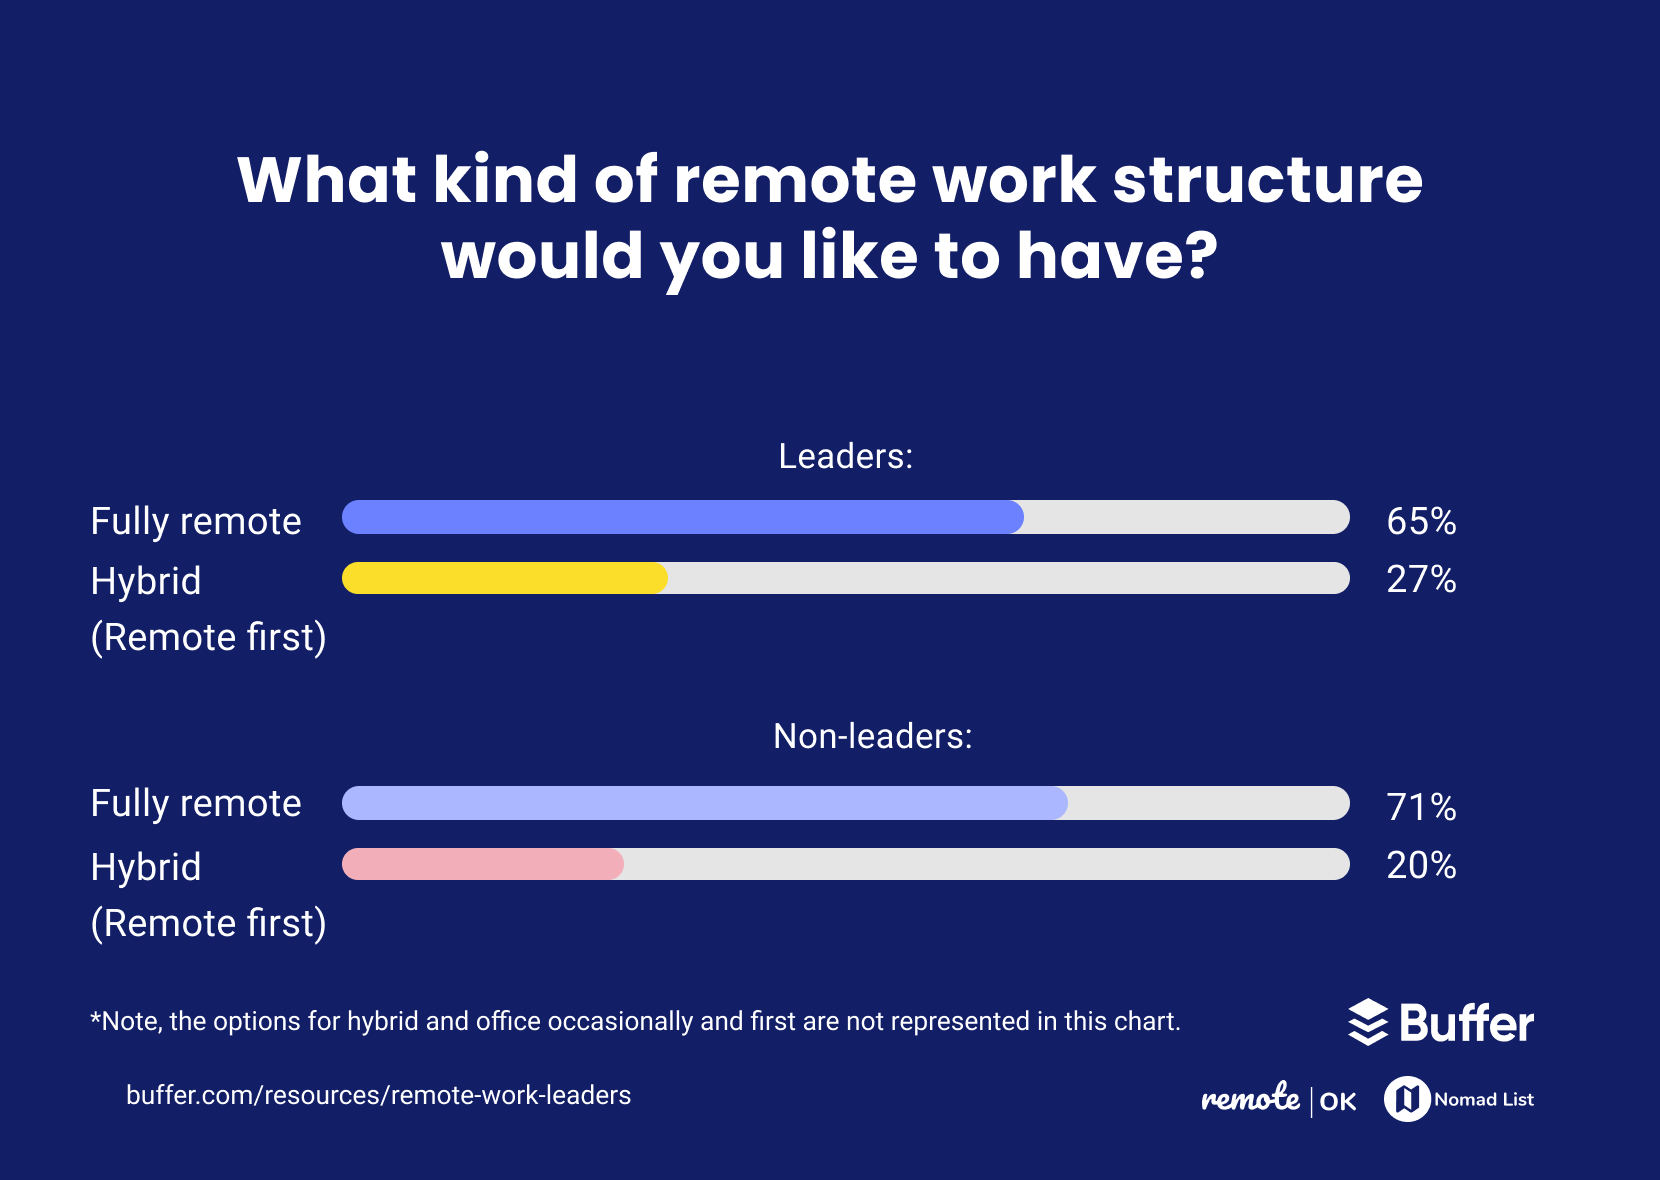 How Are Leaders Experiencing Remote Work?